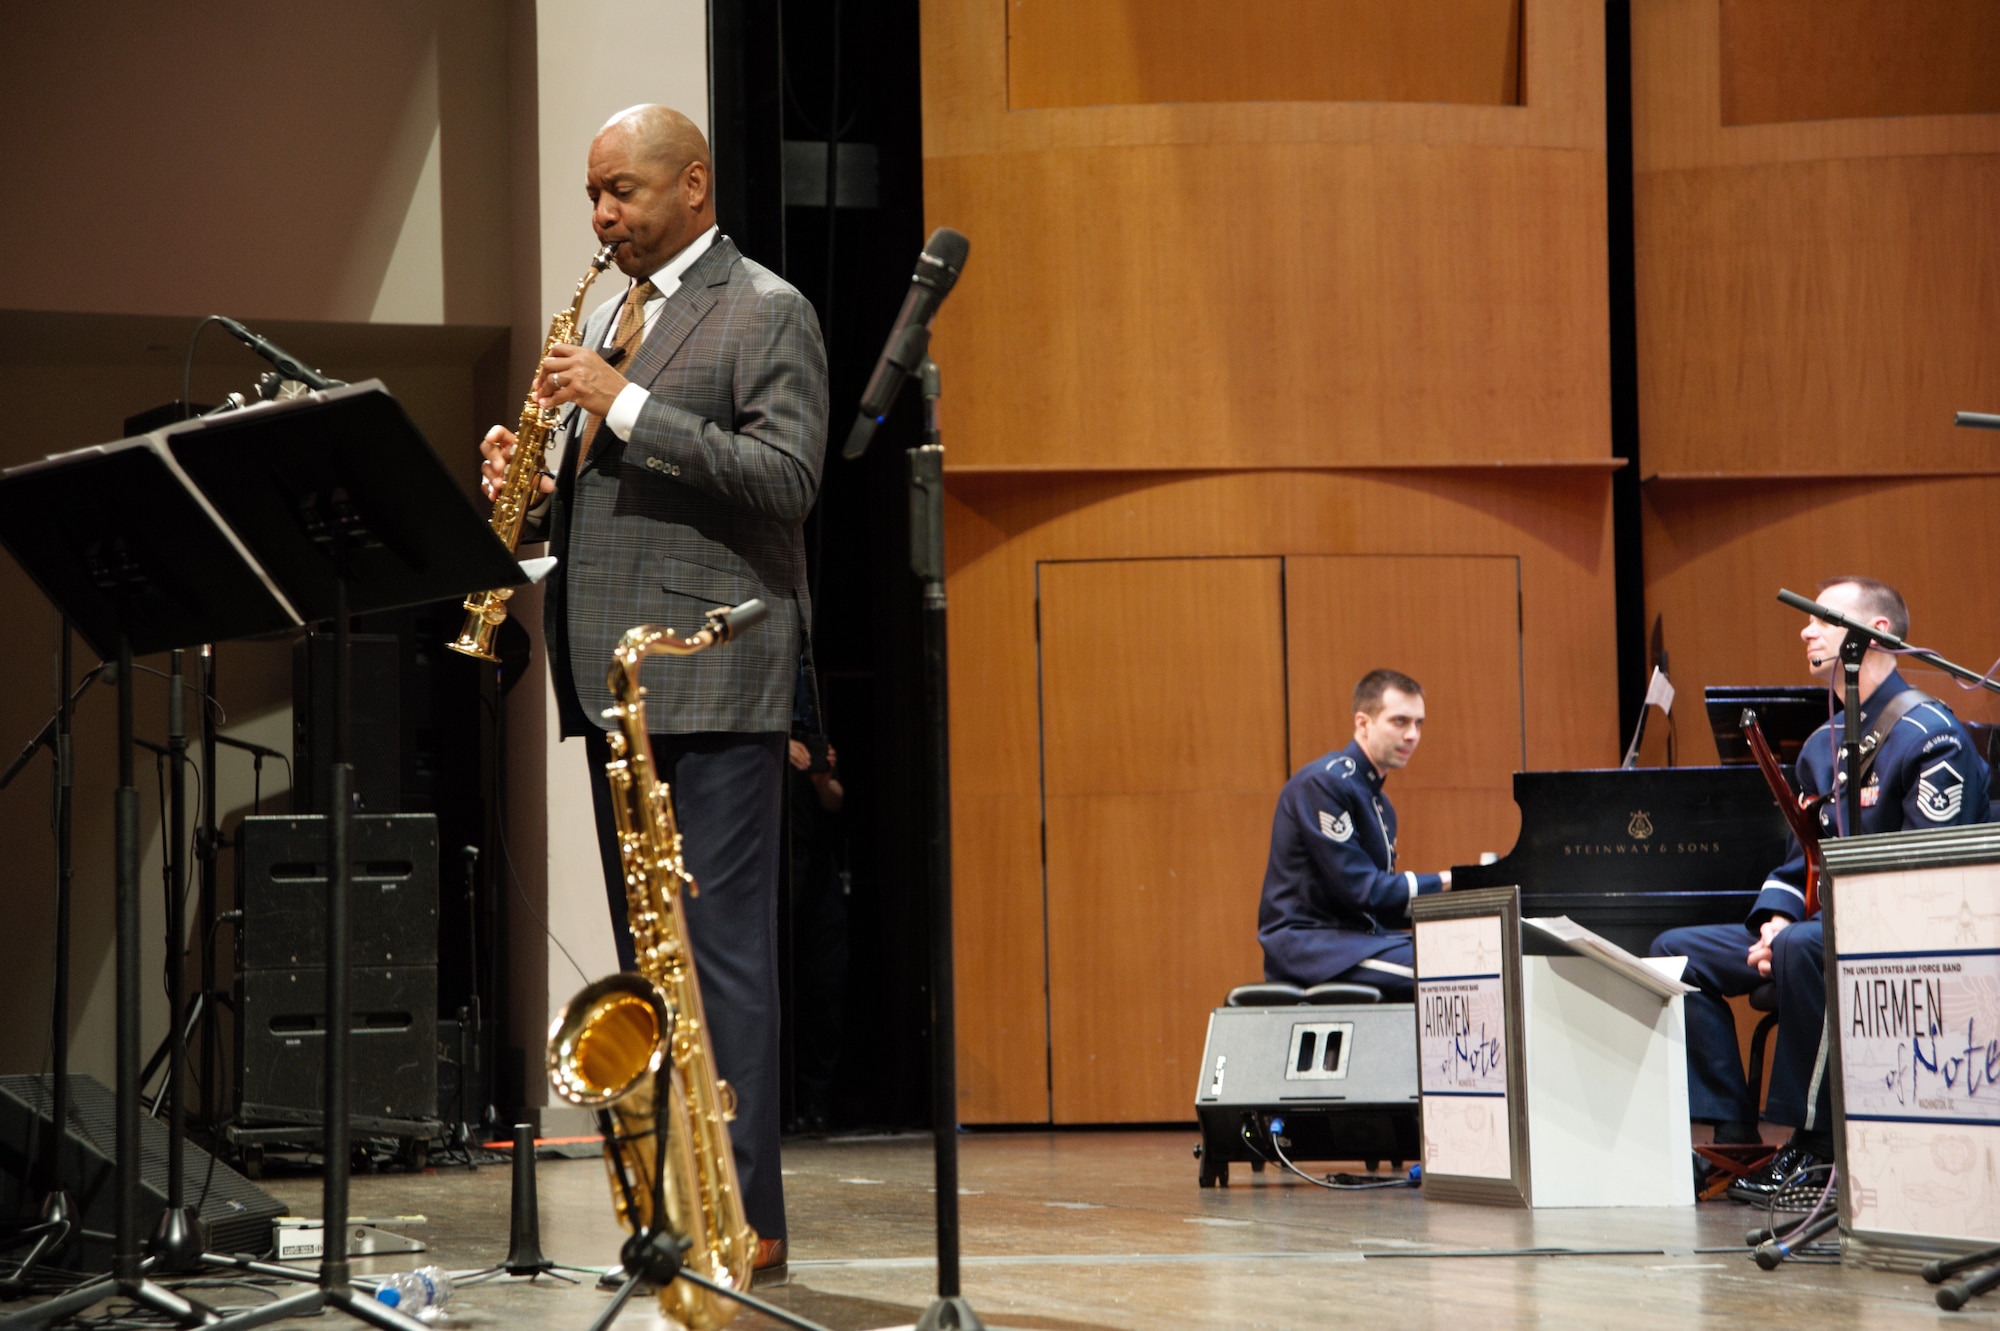 The Air Force Band's premiere jazz ensemble welcomes a jazz artist to sit in with the troupe and bring a unique concert opportunity to the public.